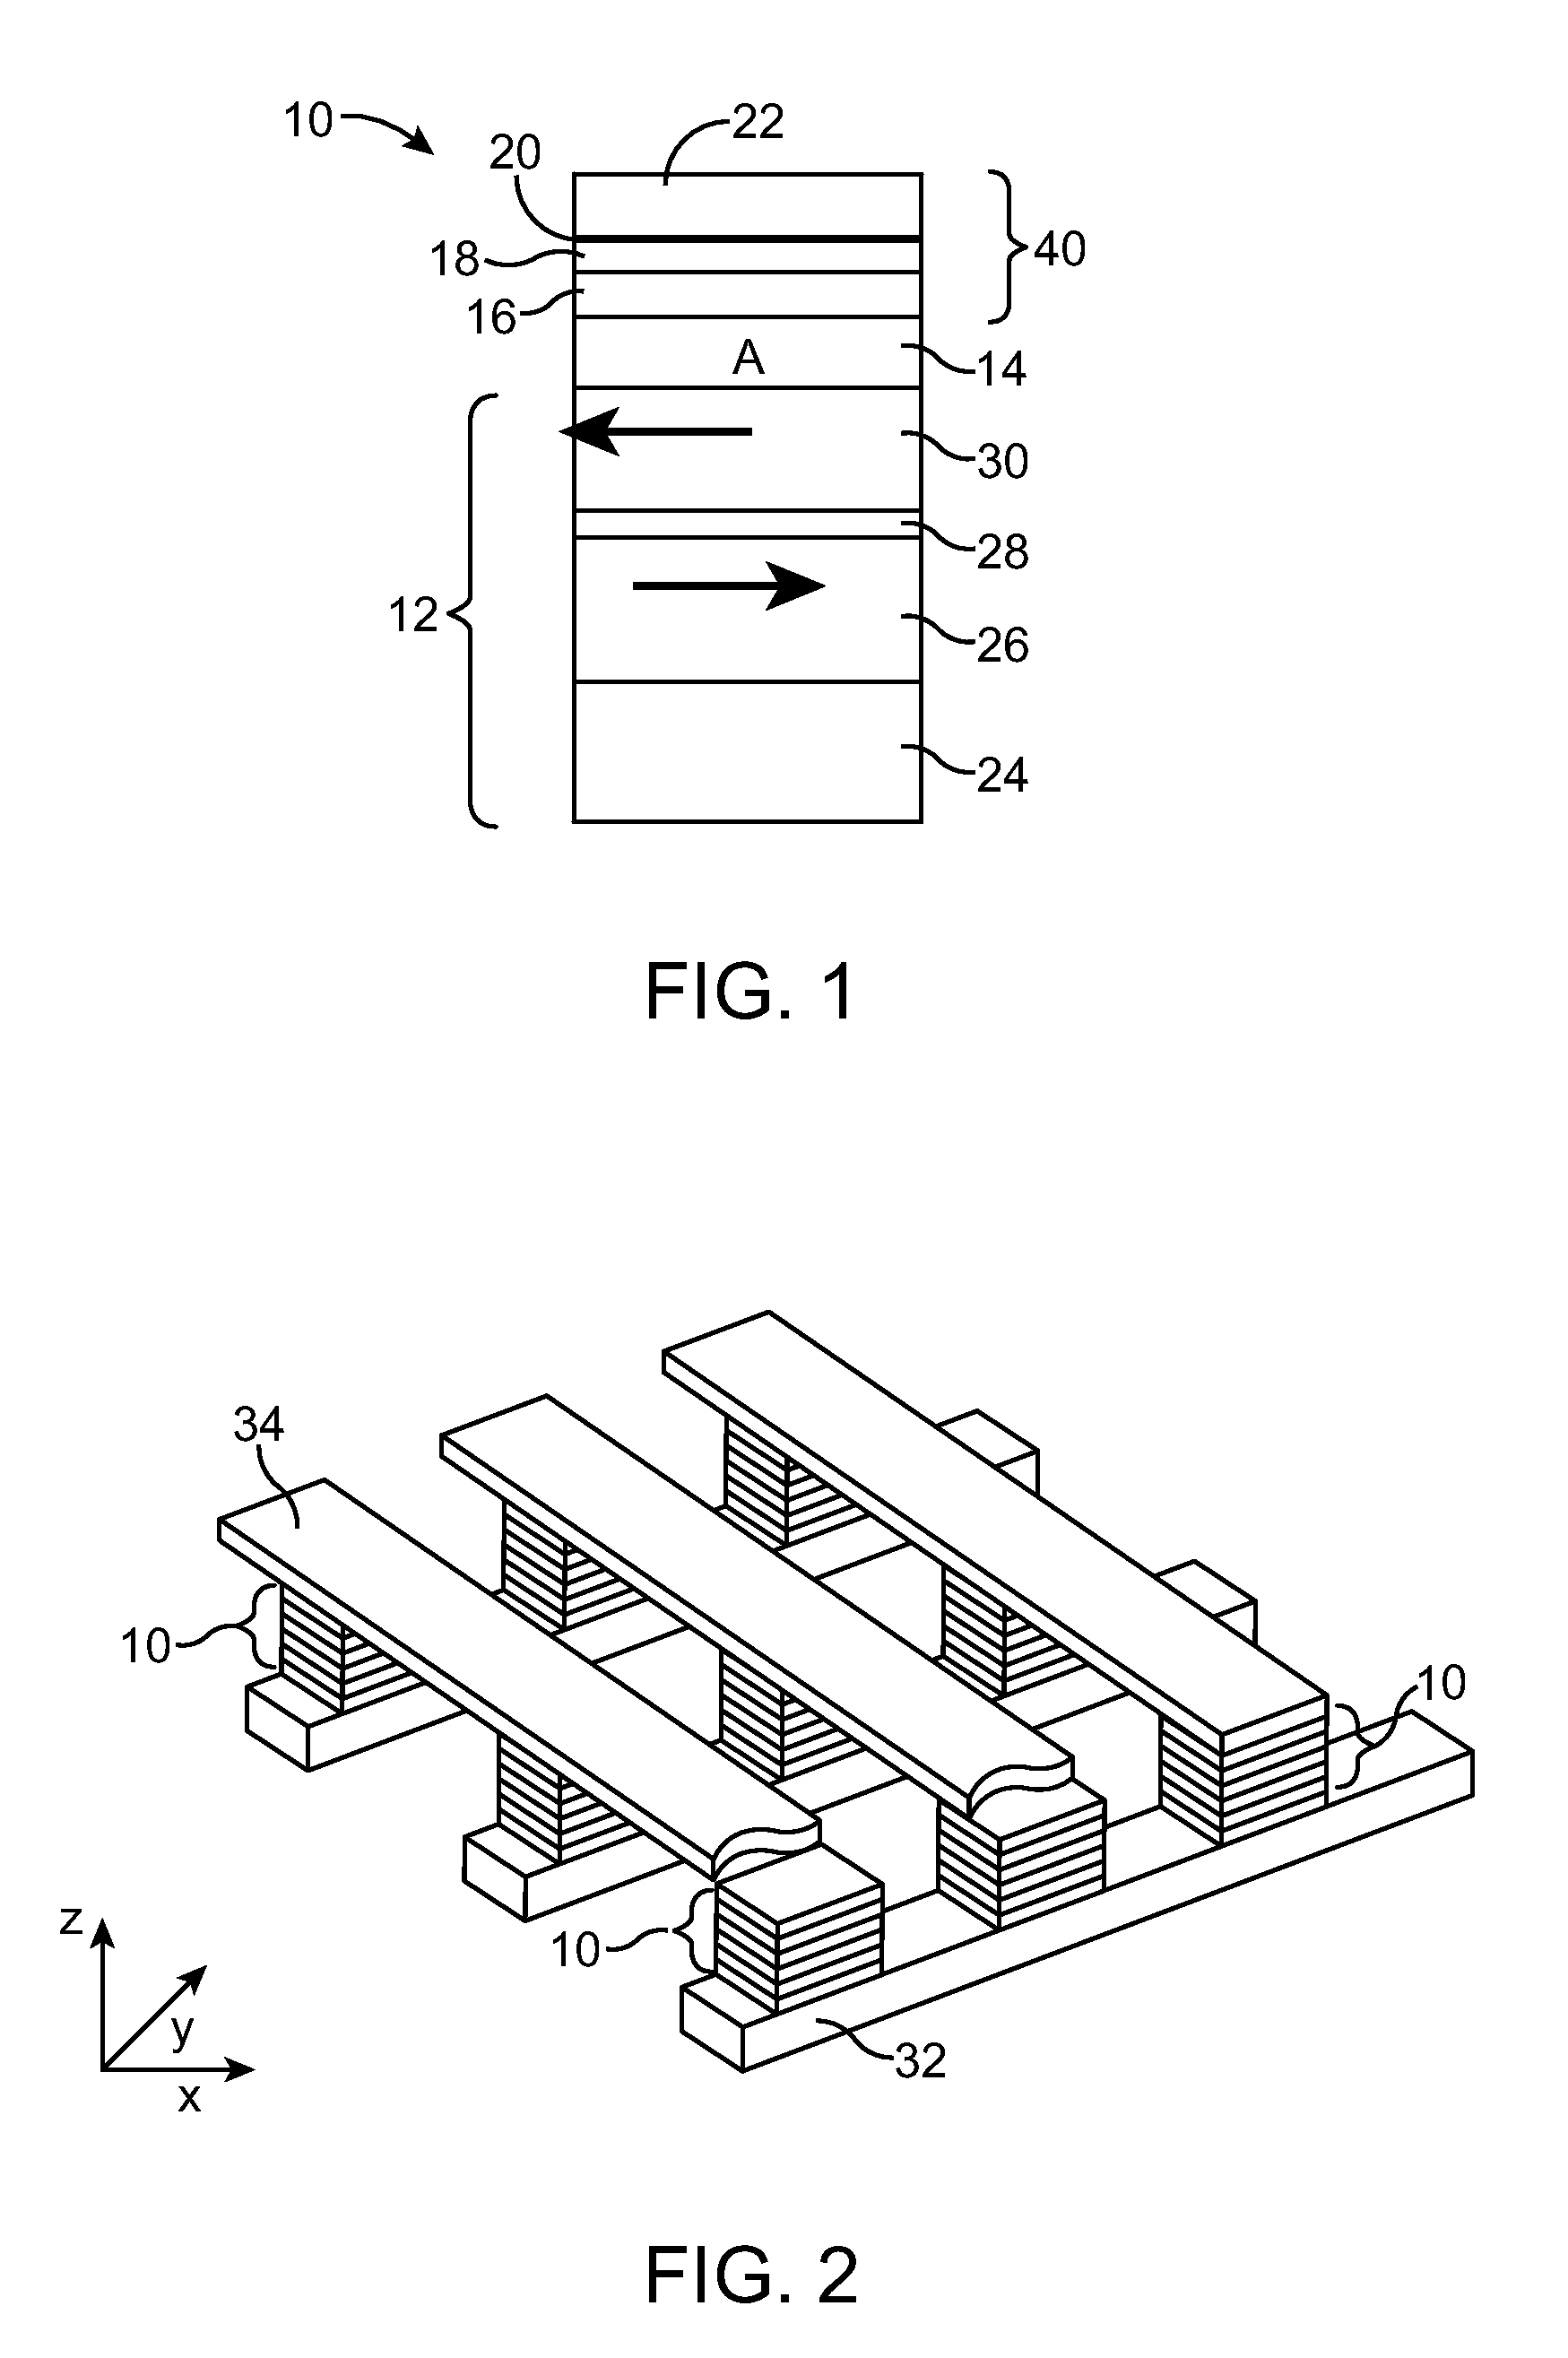 High Capacity Low Cost Multi-Stacked Cross-Line Magnetic Memory